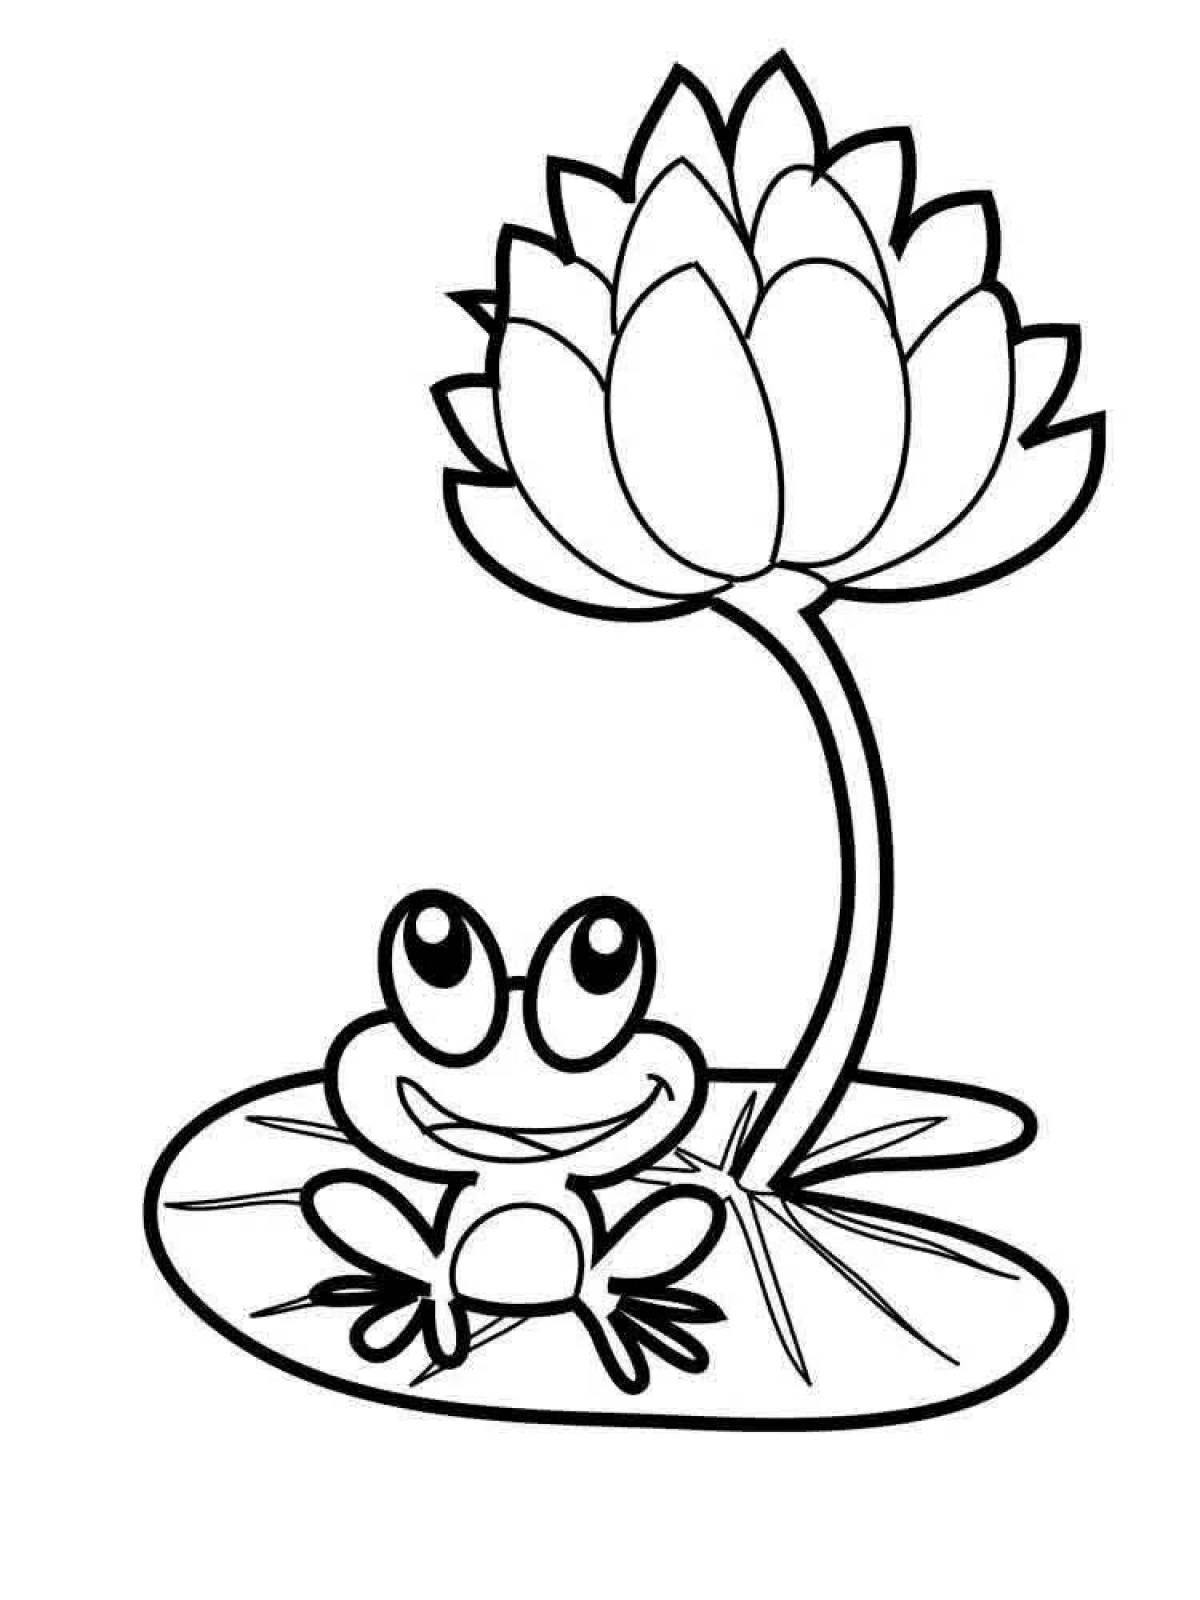 Coloring page blessed water lily